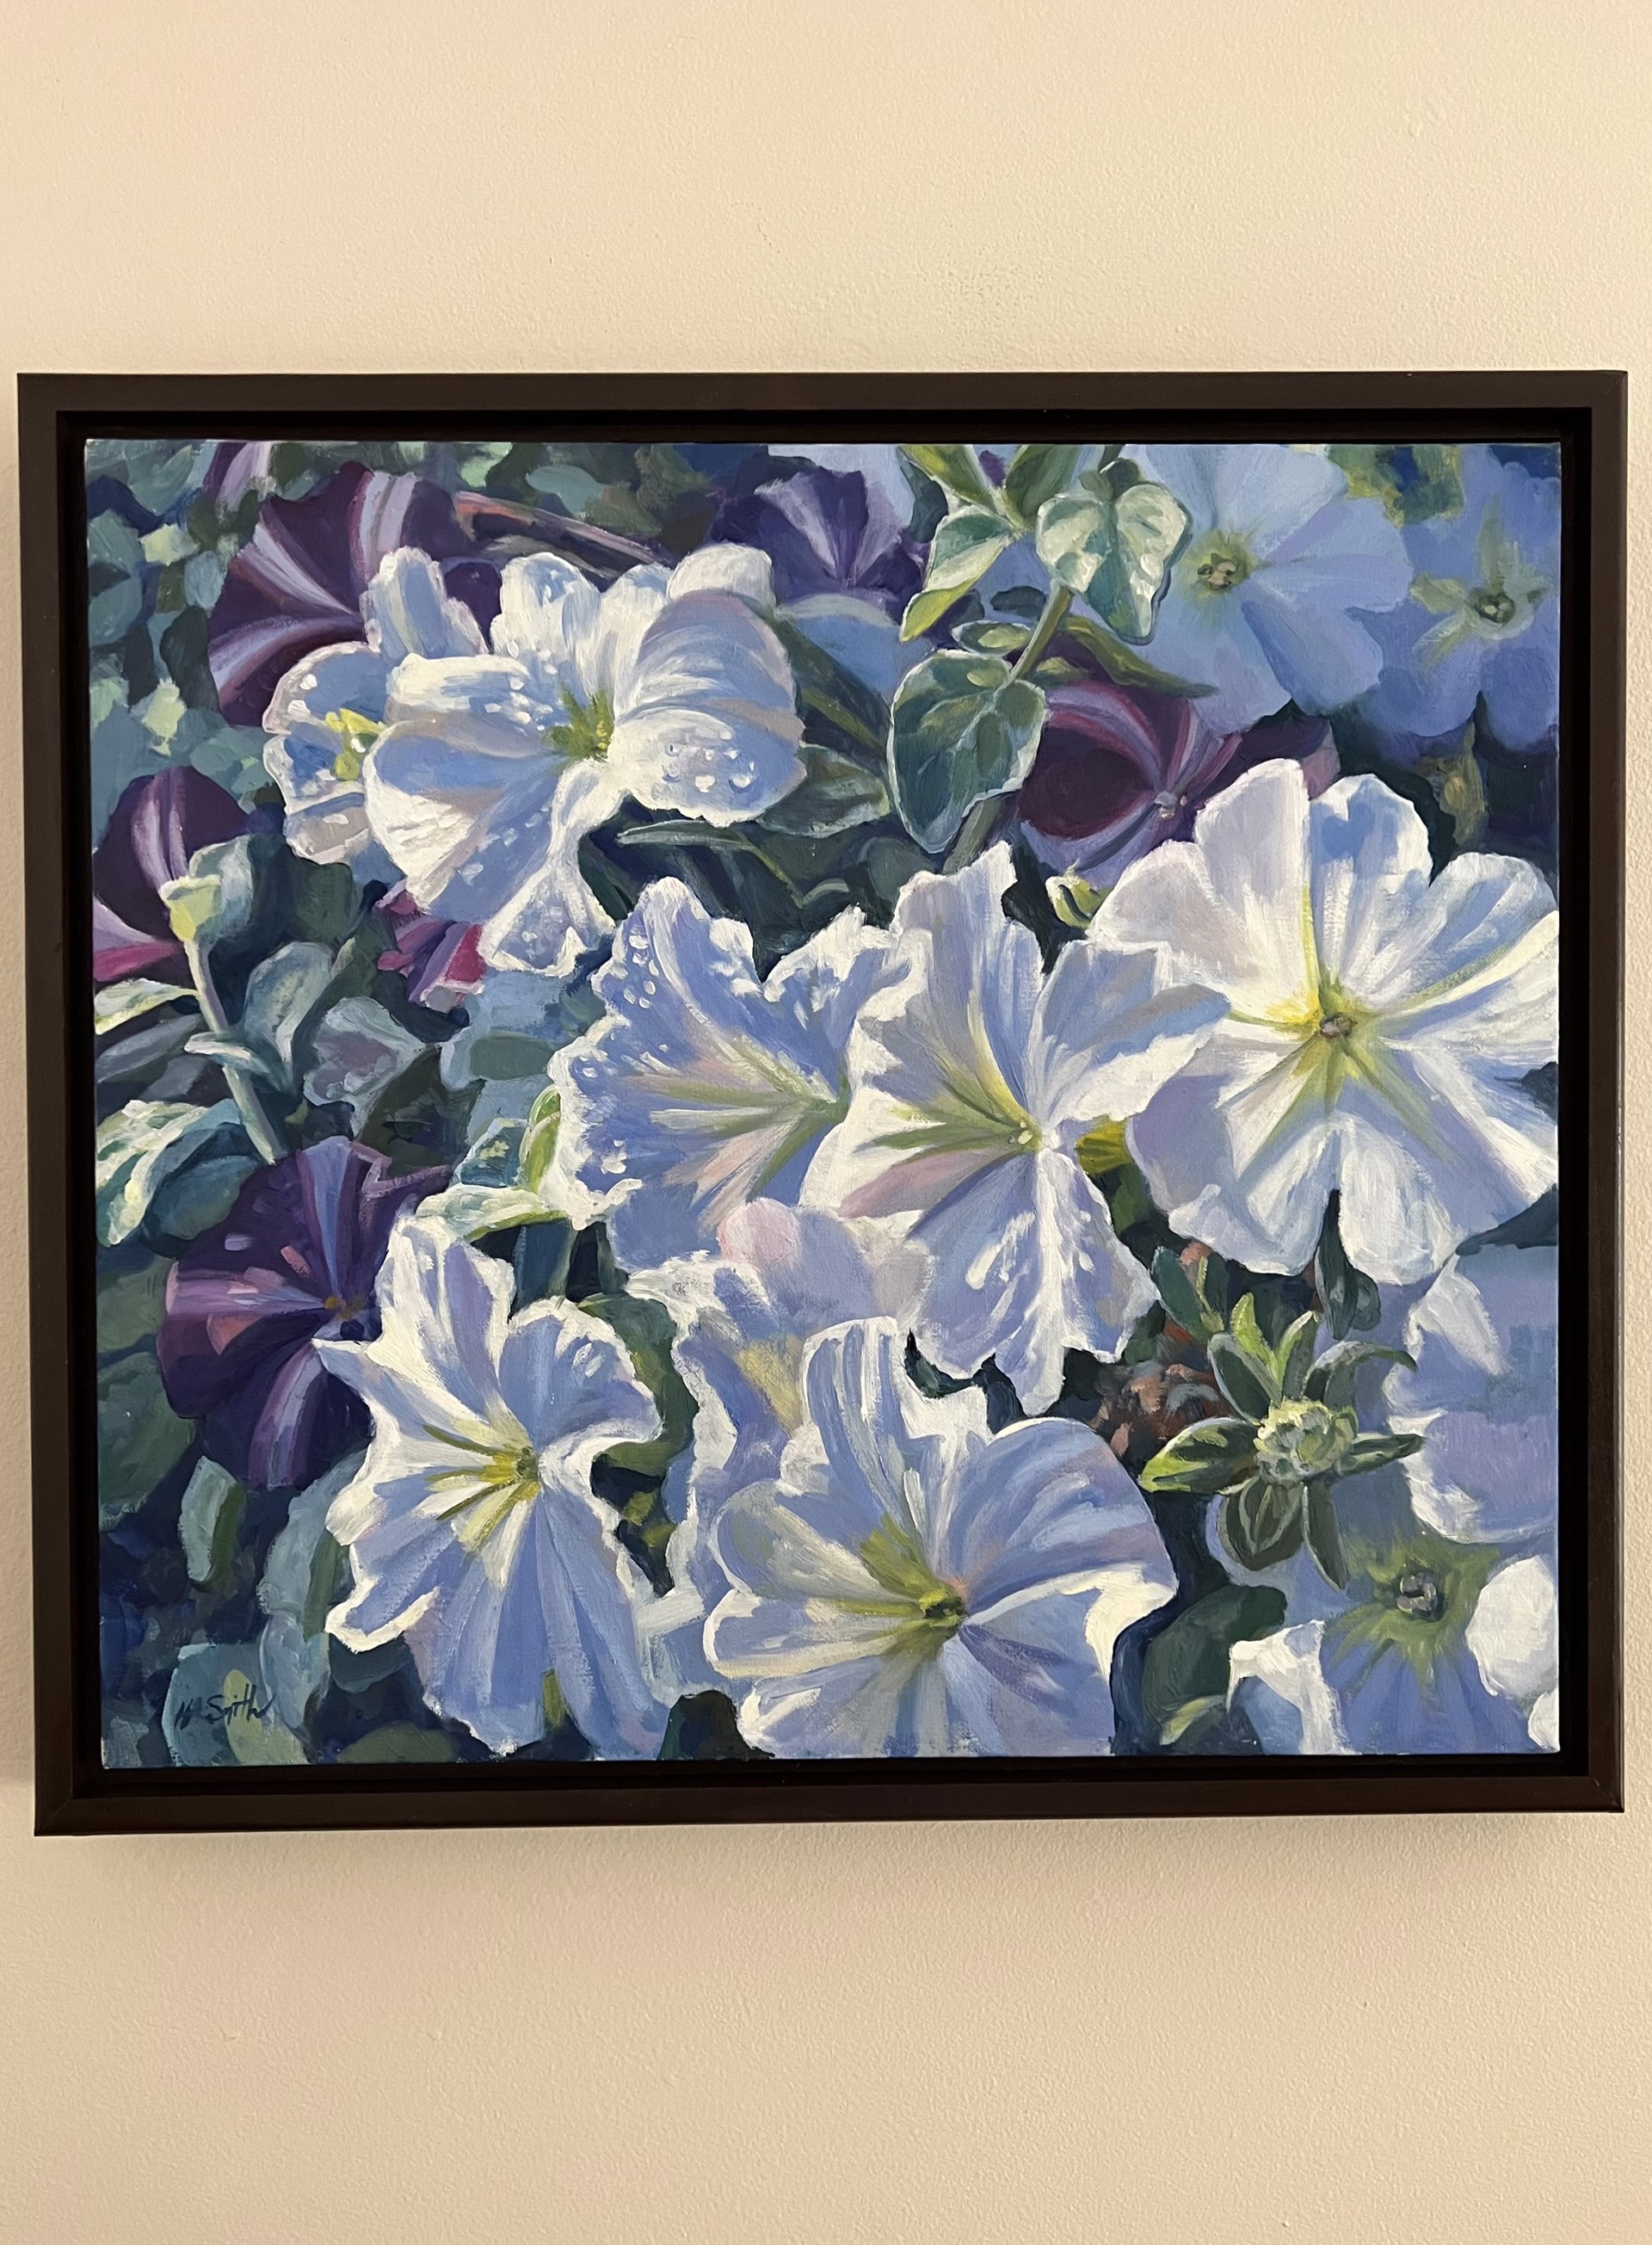 Cascading Petunias by Holly L. Smith